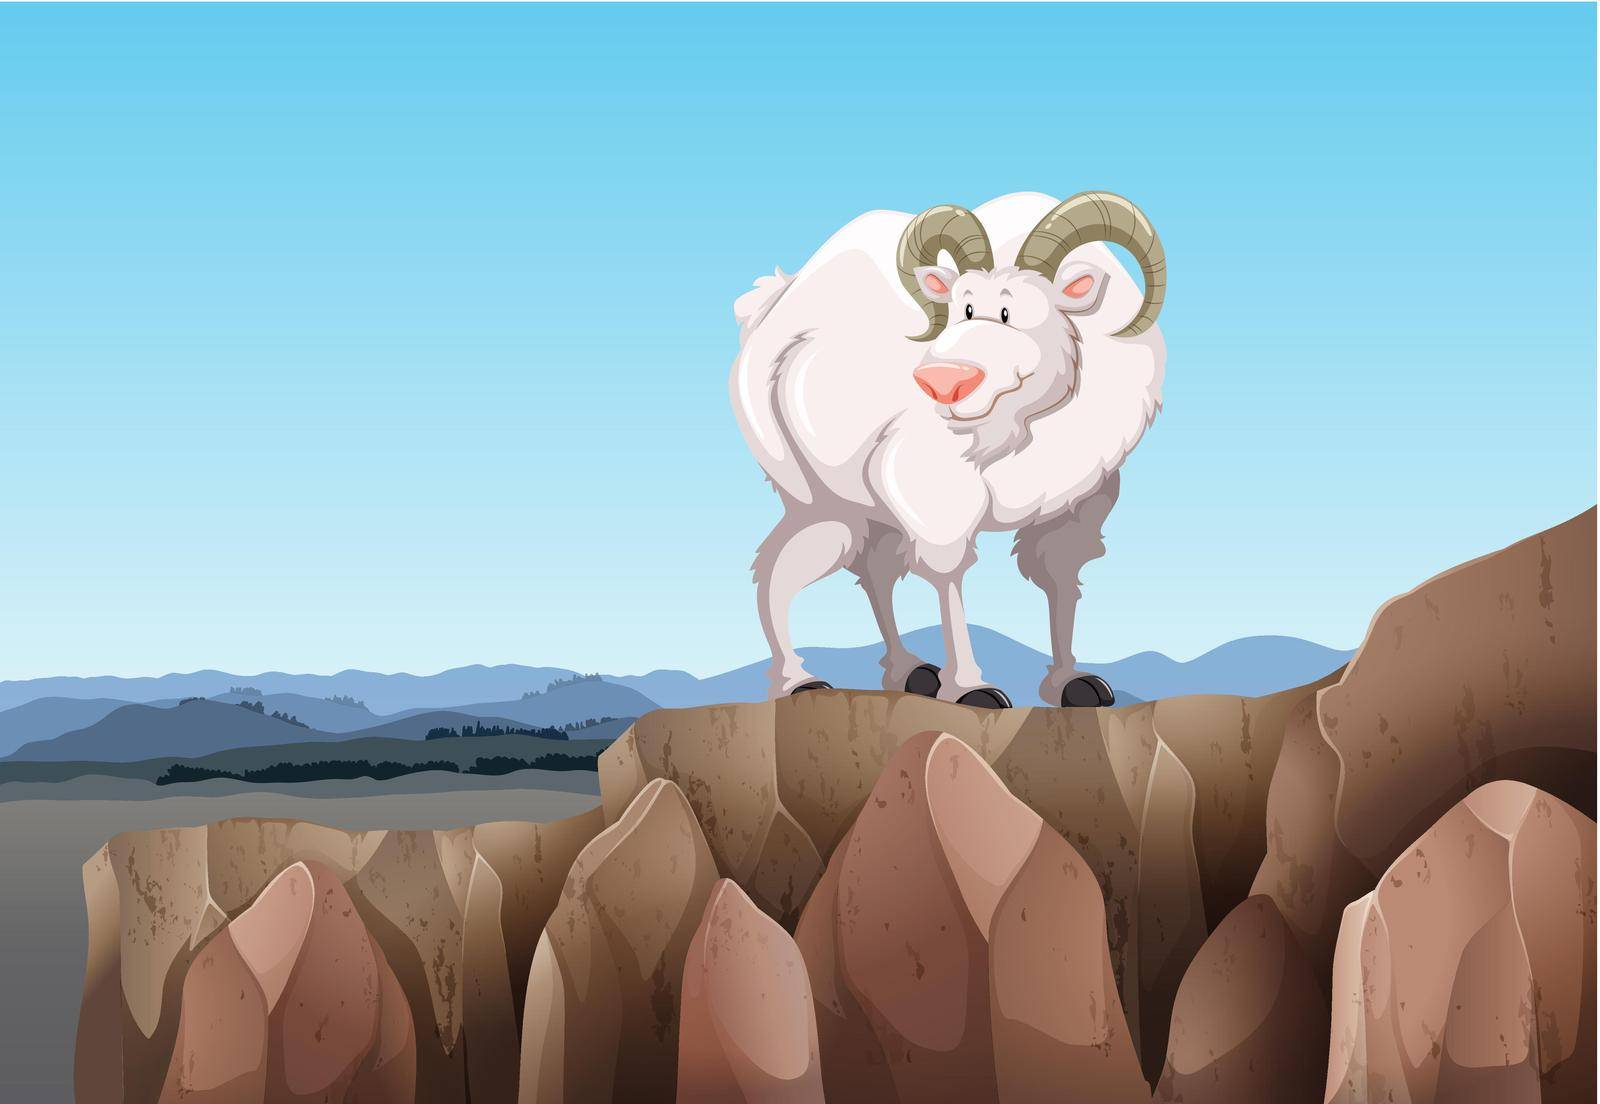 White goat standing on a mountain